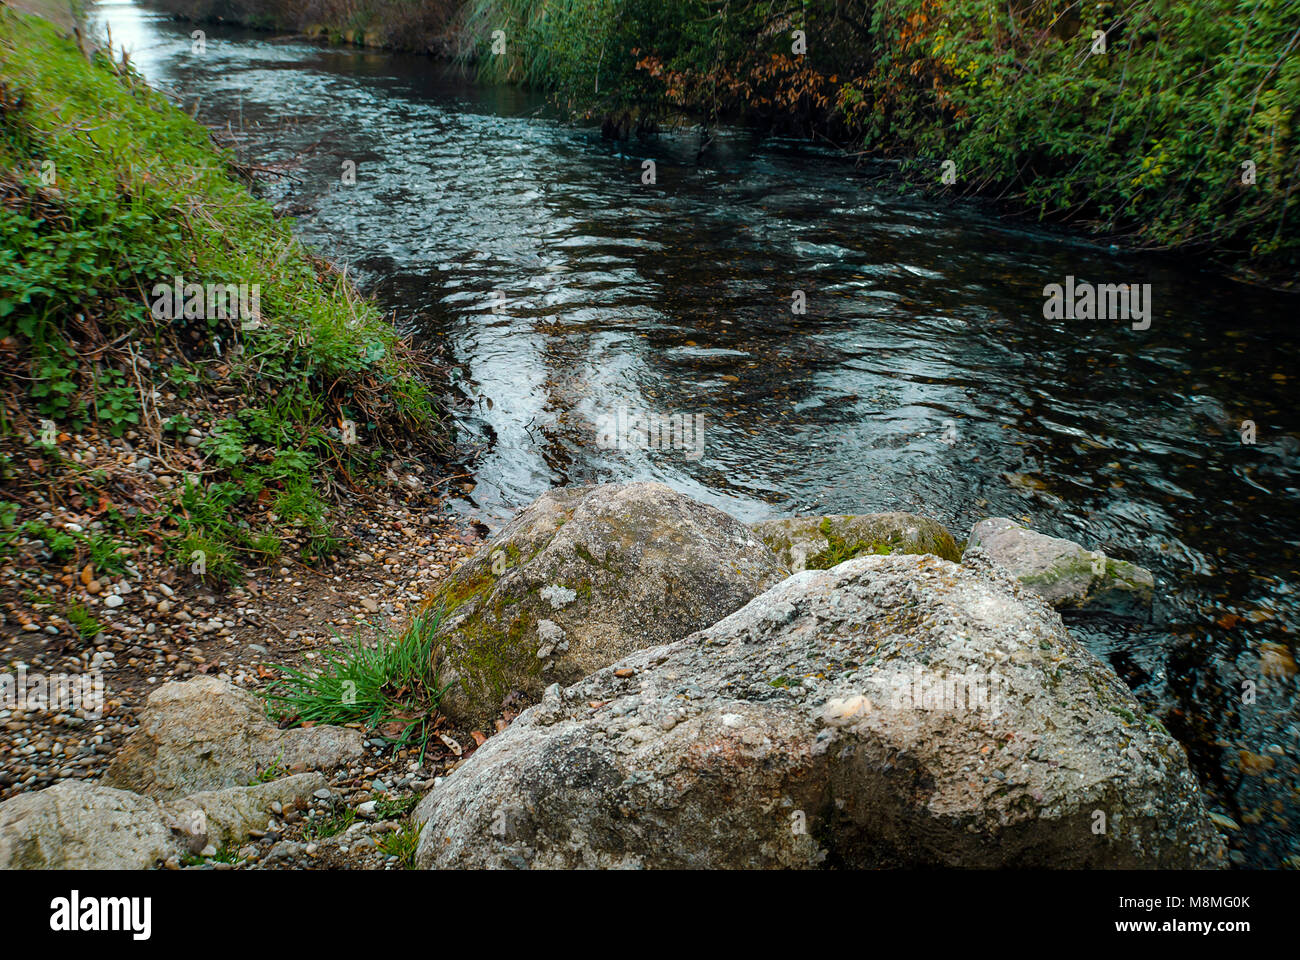 A Litlle water-stream with rocks in the foreground, and vegetation. Stock Photo